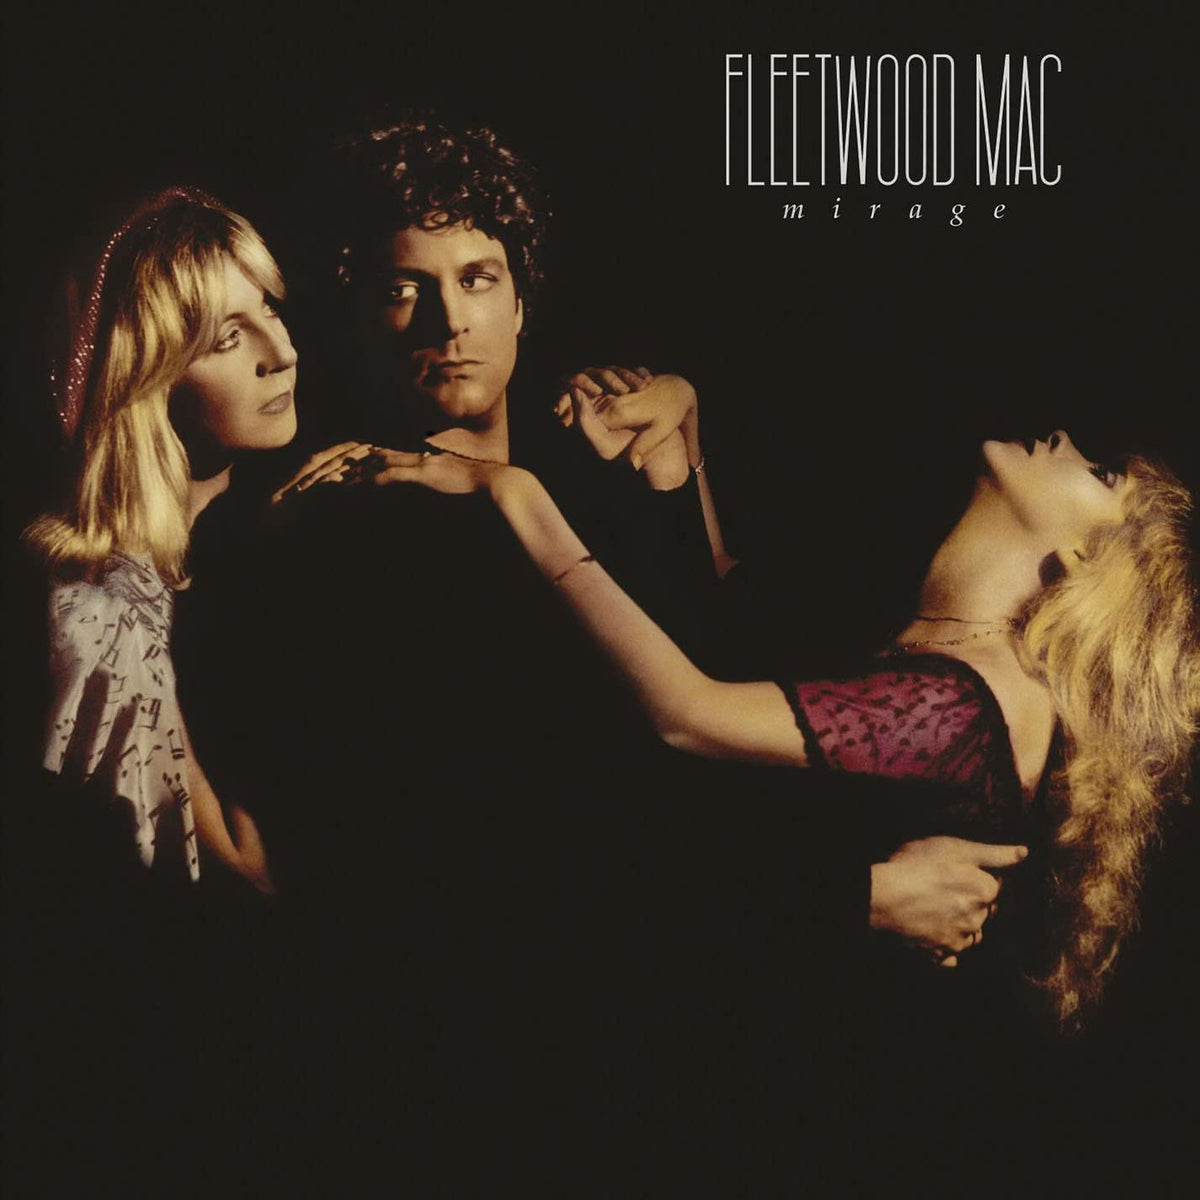 Fleetwood Mac - Mirage (Used) (Mint Condition)